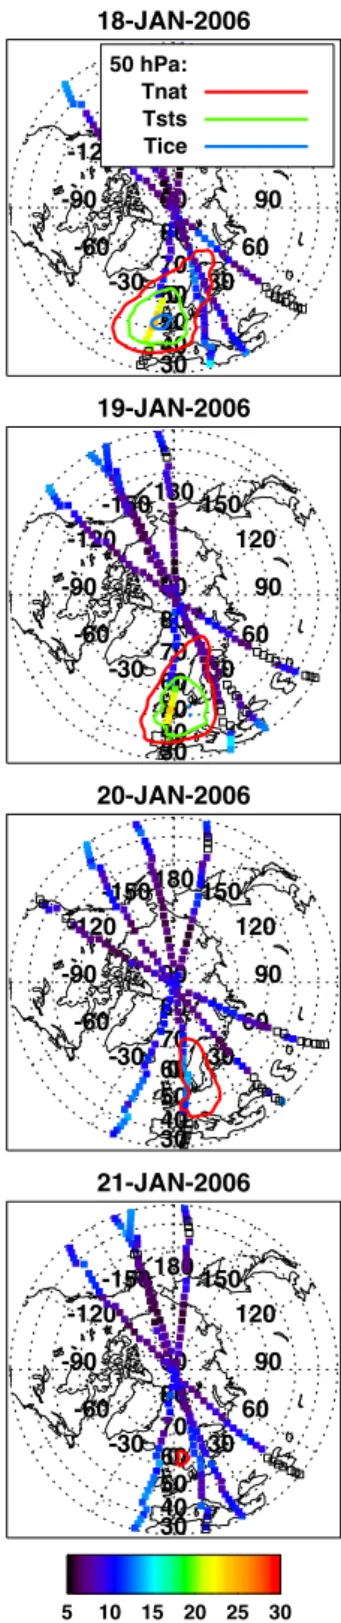 Fig. 2. PSC top heights derived from MIPAS/Envisat observations on 18 to 21 January 2006